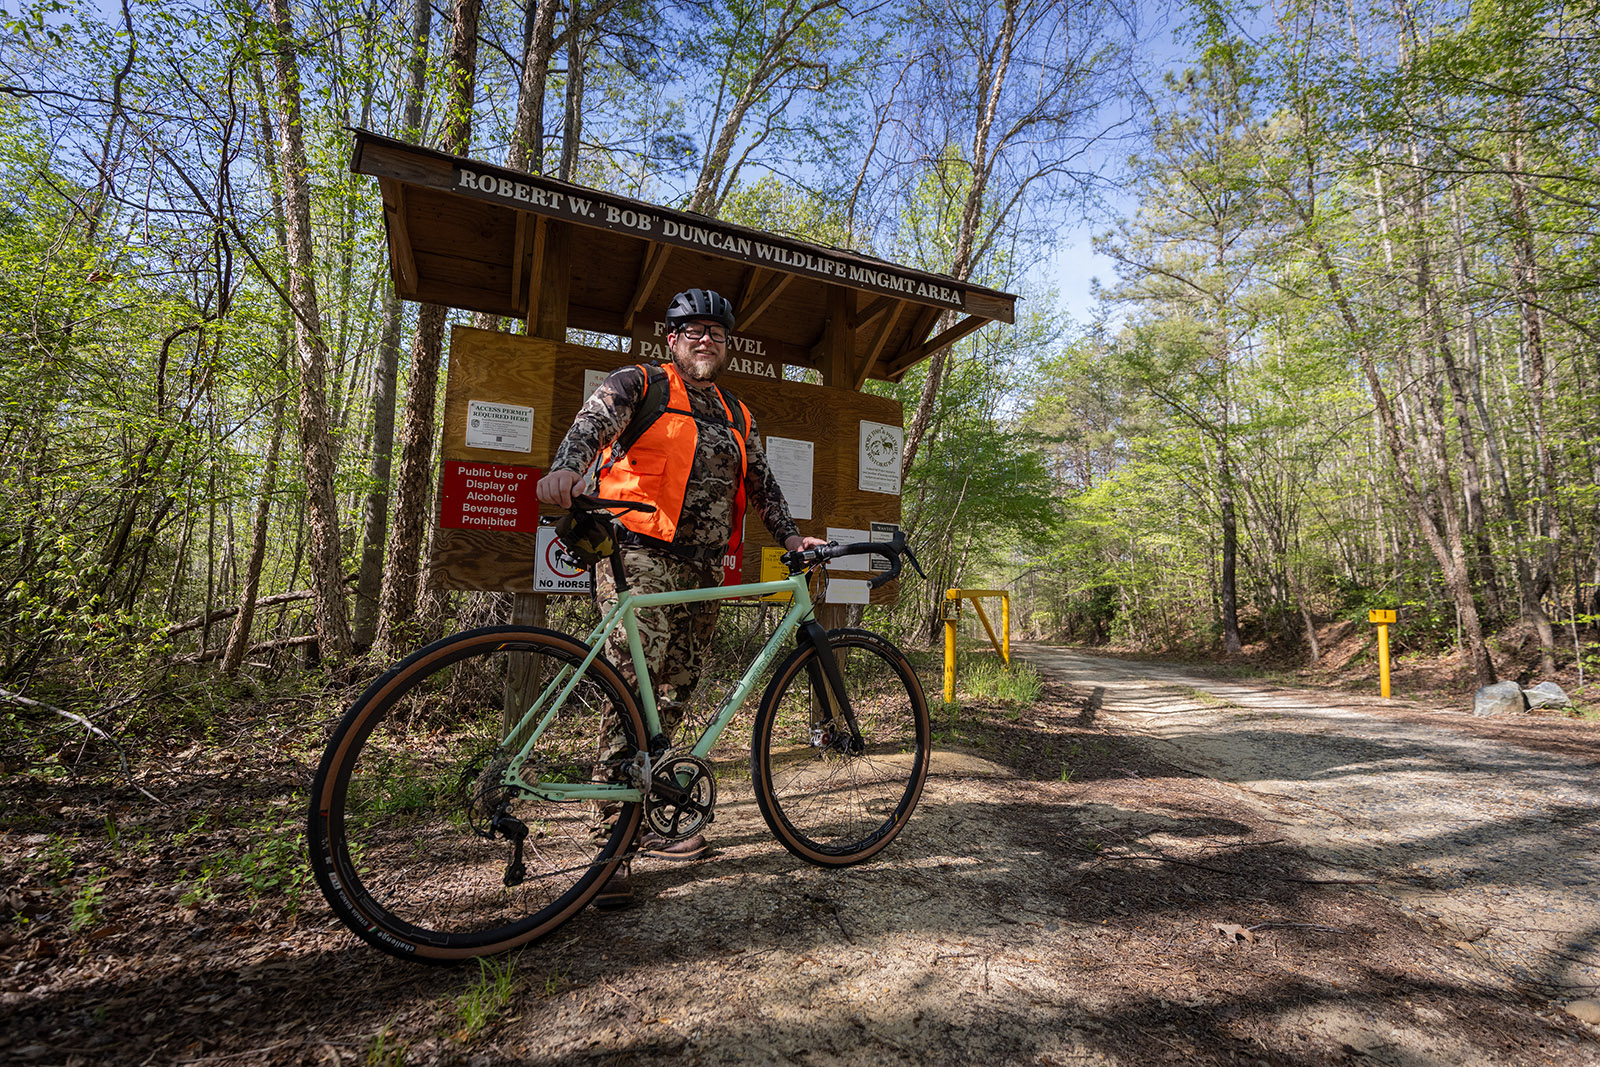 A photo of a man next to a bicycle in front of a Wildlife Management Area kiosk.